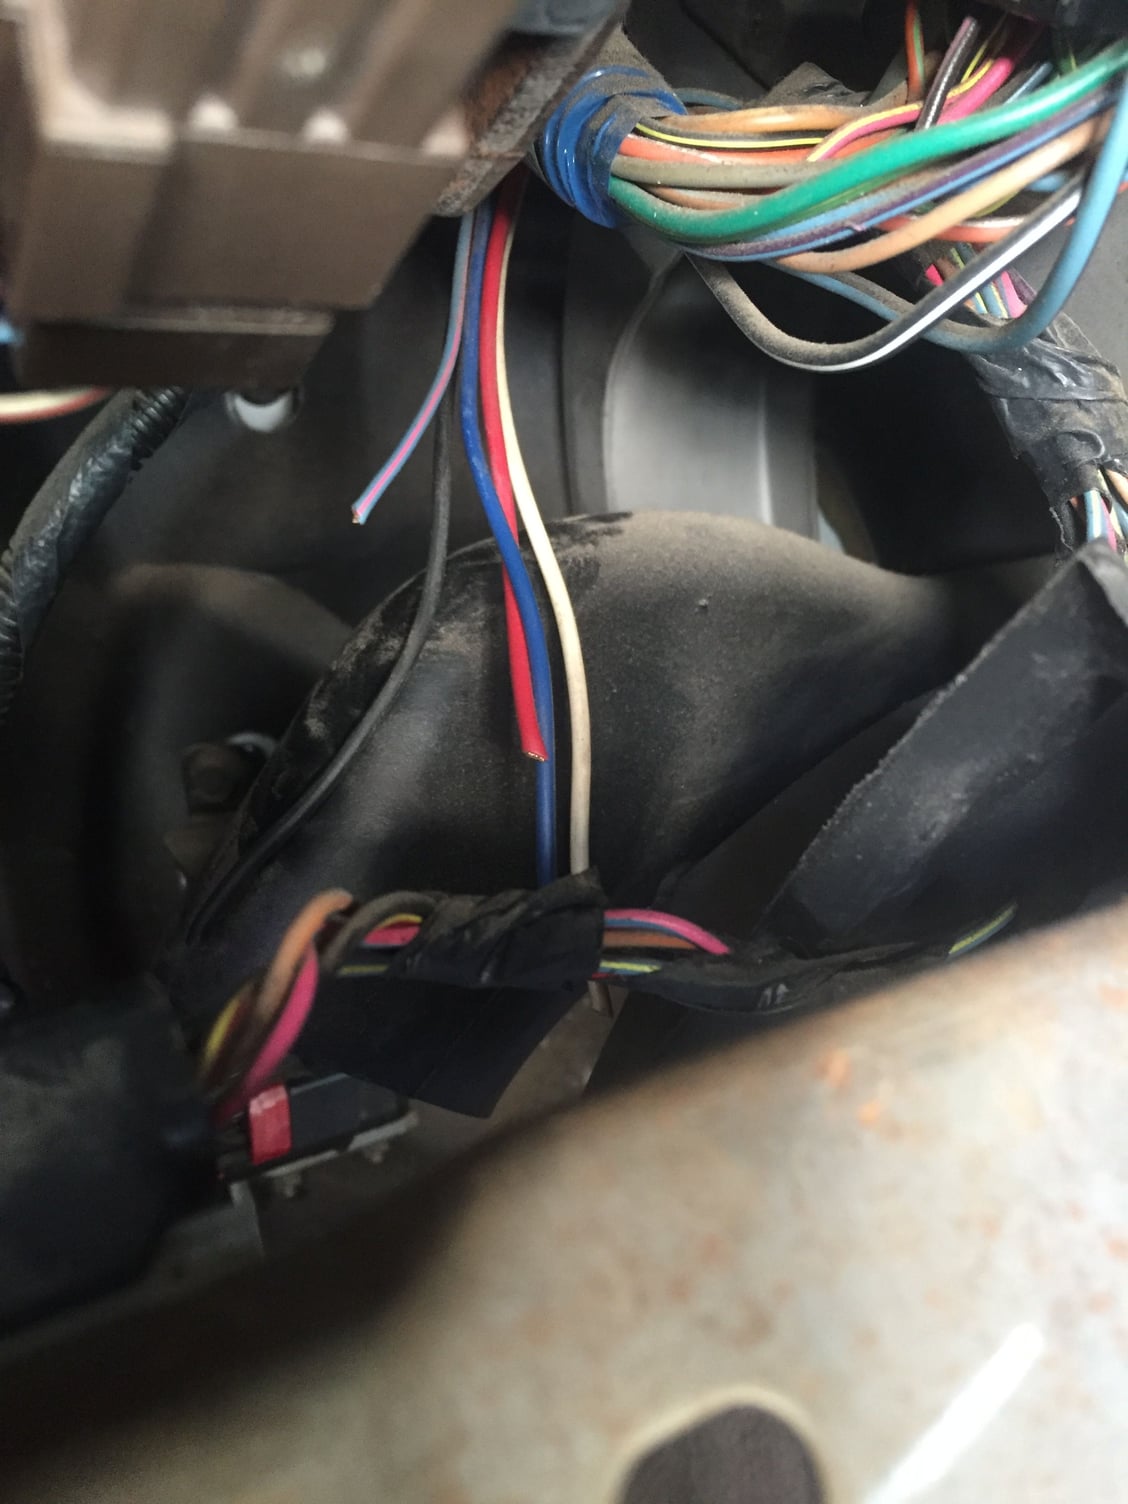 Found some cut wires under my dash, help - Ford Truck Enthusiasts Forums